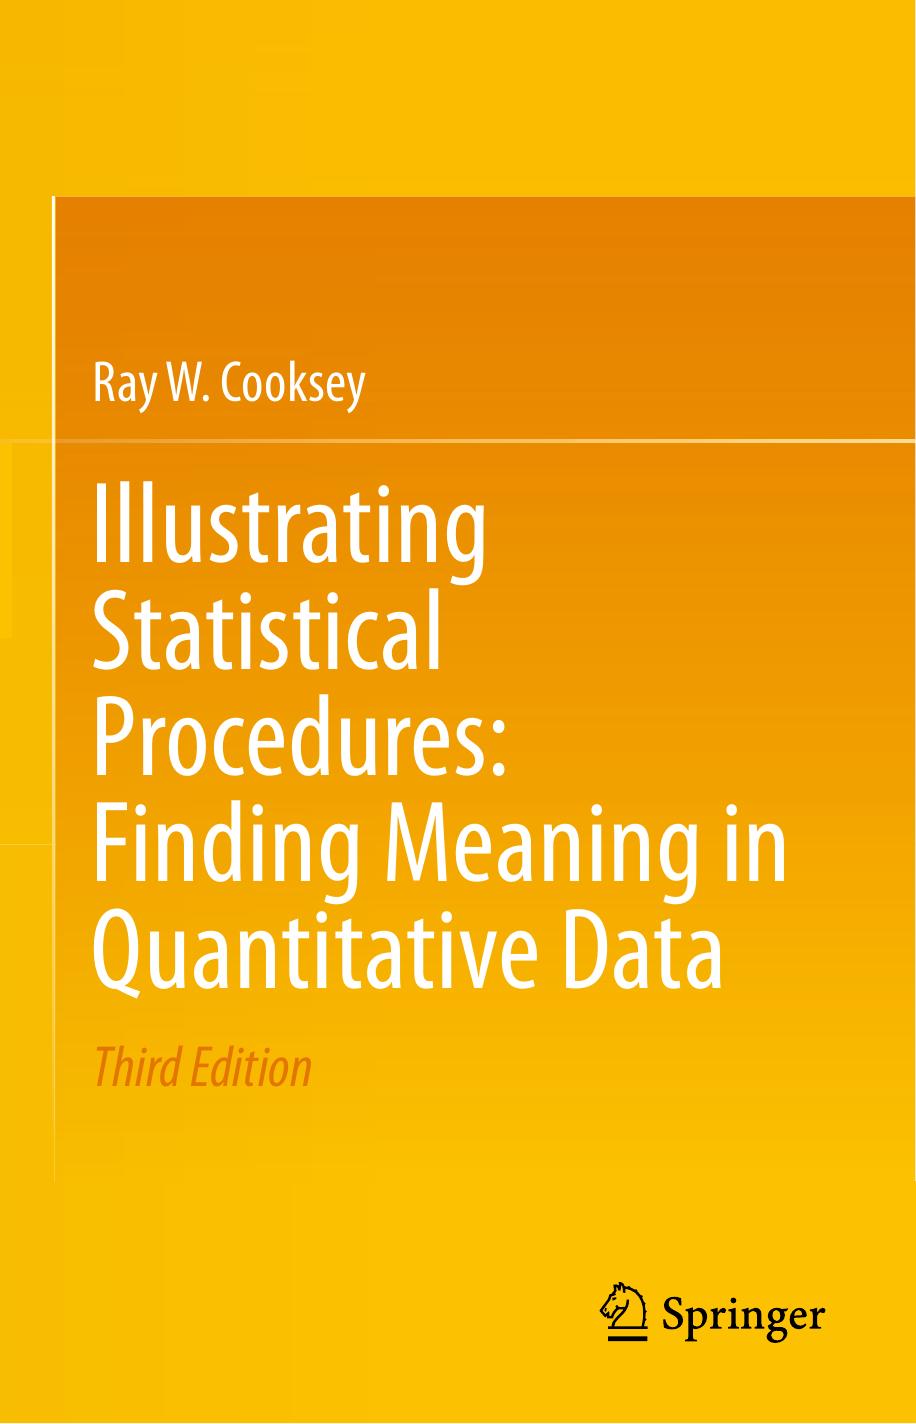 Illustrating Statistical Procedures: Finding Meaning in Quantitative Data by Ray W. Cooksey